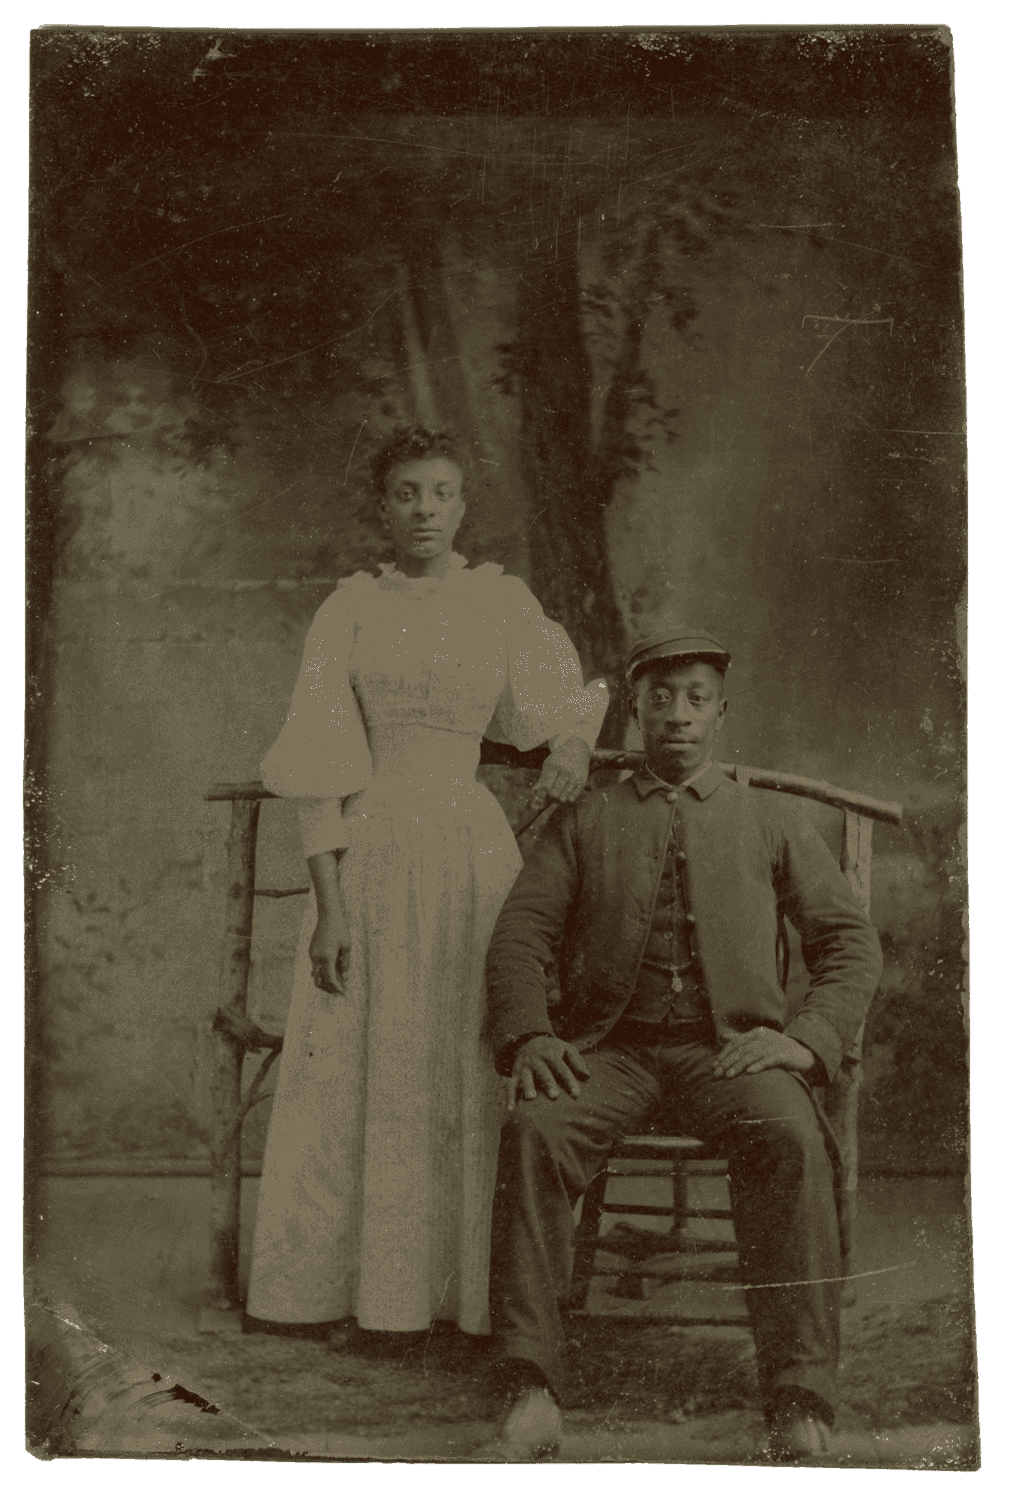 Tintype photograph depicting a seated soldier with woman standing next to him. Woman is wearing long white dress with puffy sleeves.